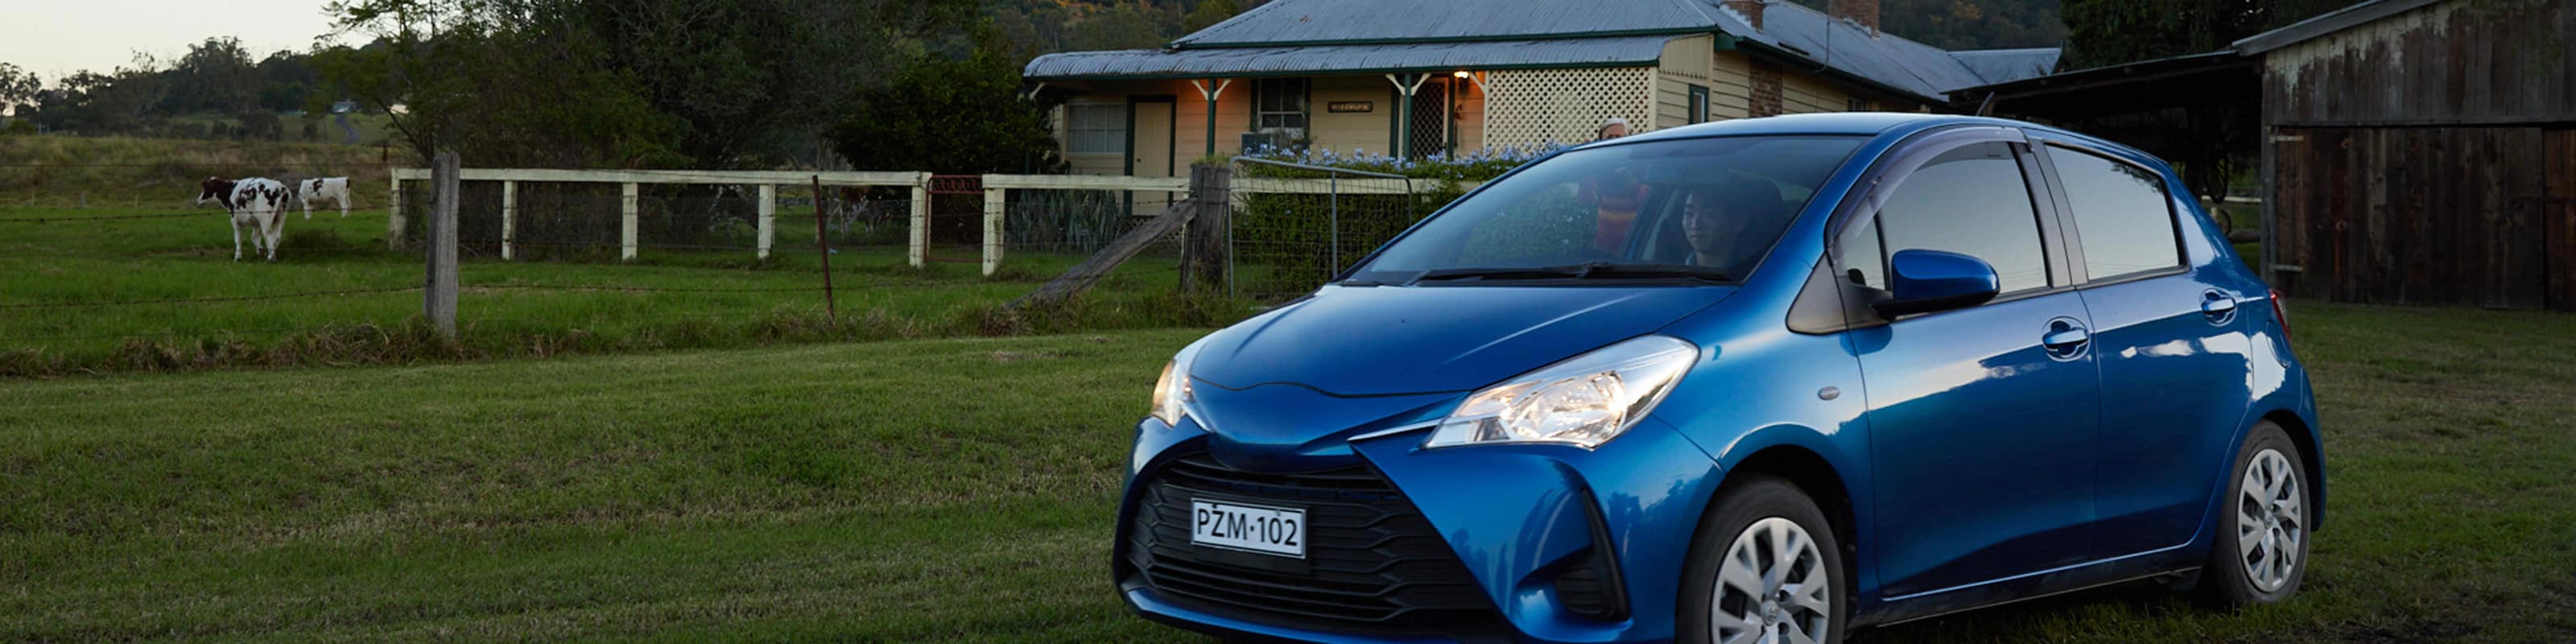 blue hatch parked outside Australian country farmhouse